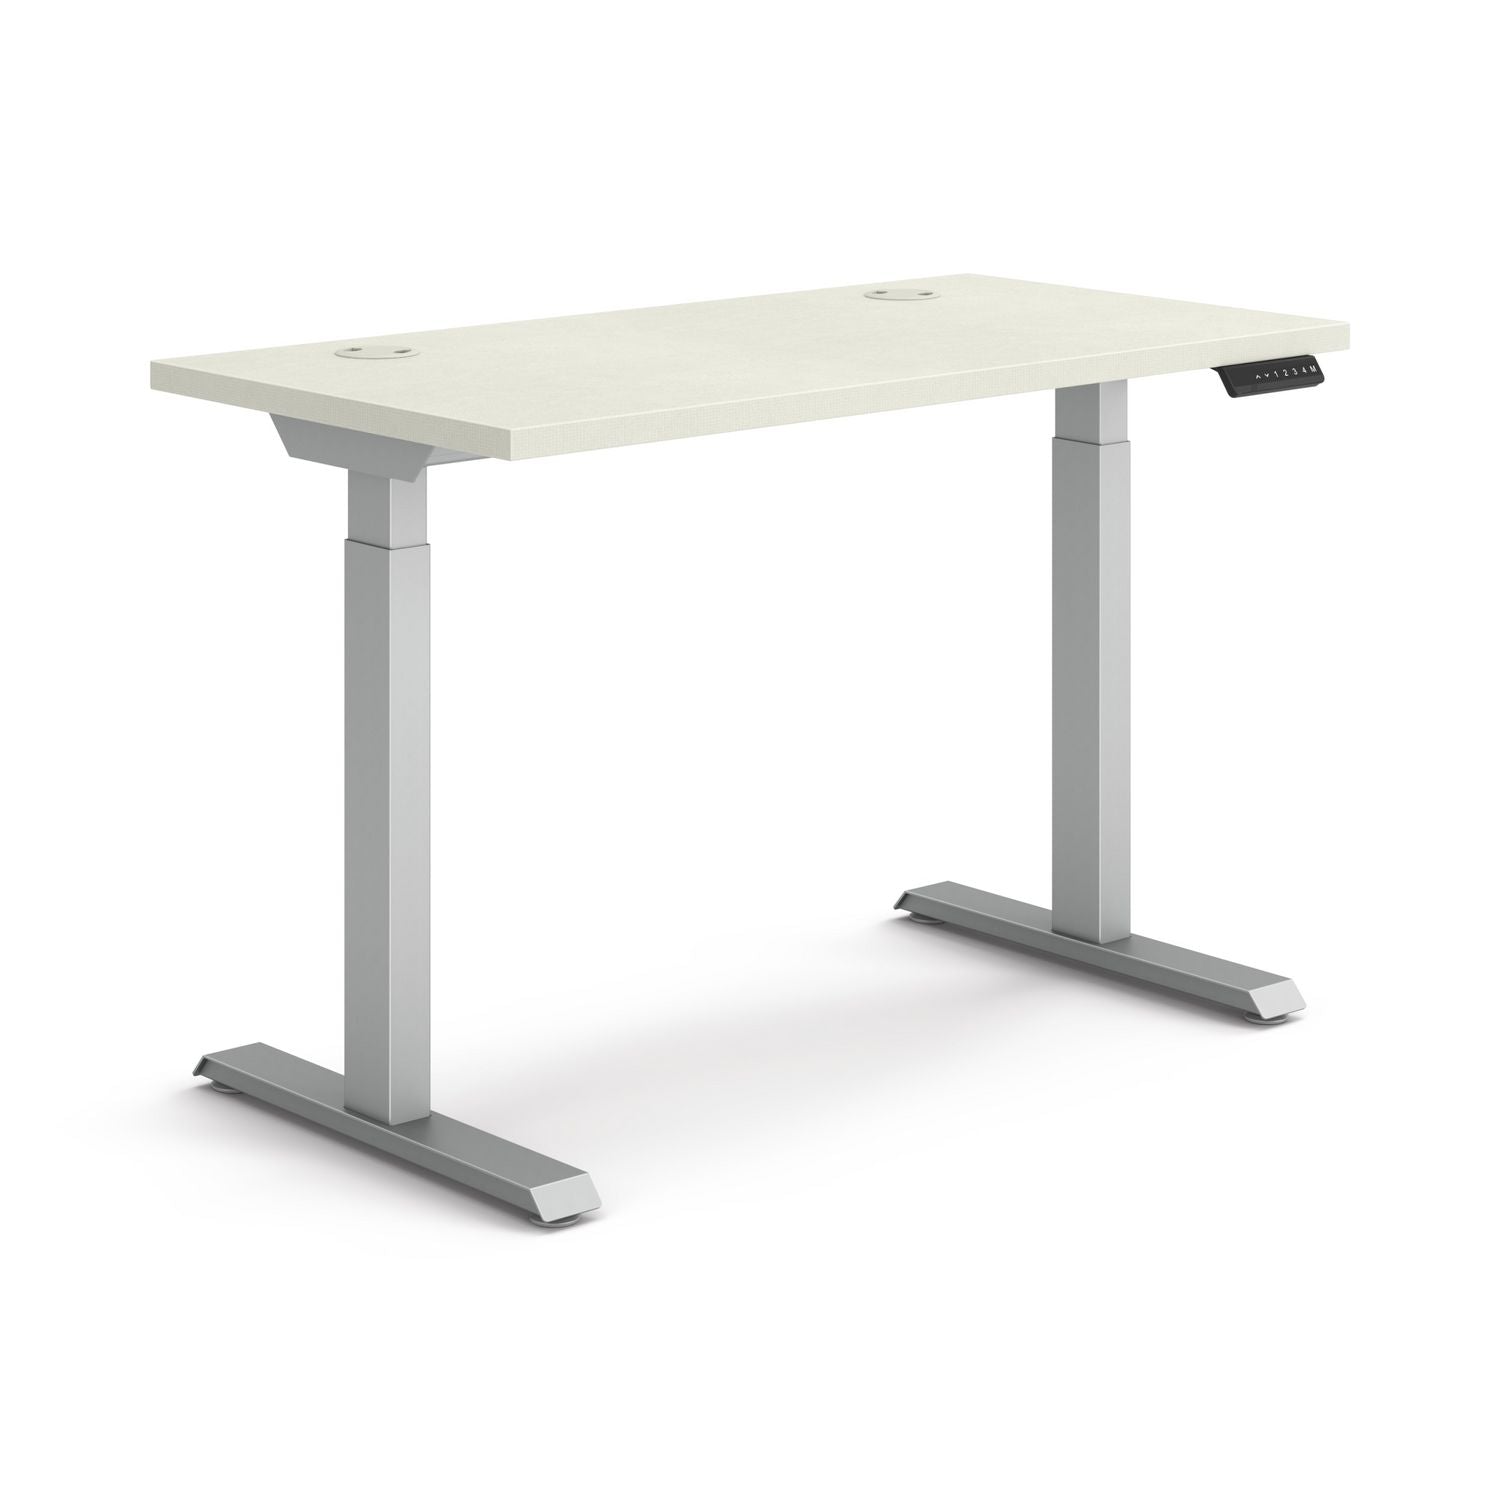 coordinate-height-adjustable-desk-bundle-2-stage-46-x-22-x-2775-to-47-silver-mesh\\silver-ships-in-7-10-business-days_honhat2smsv2246 - 1